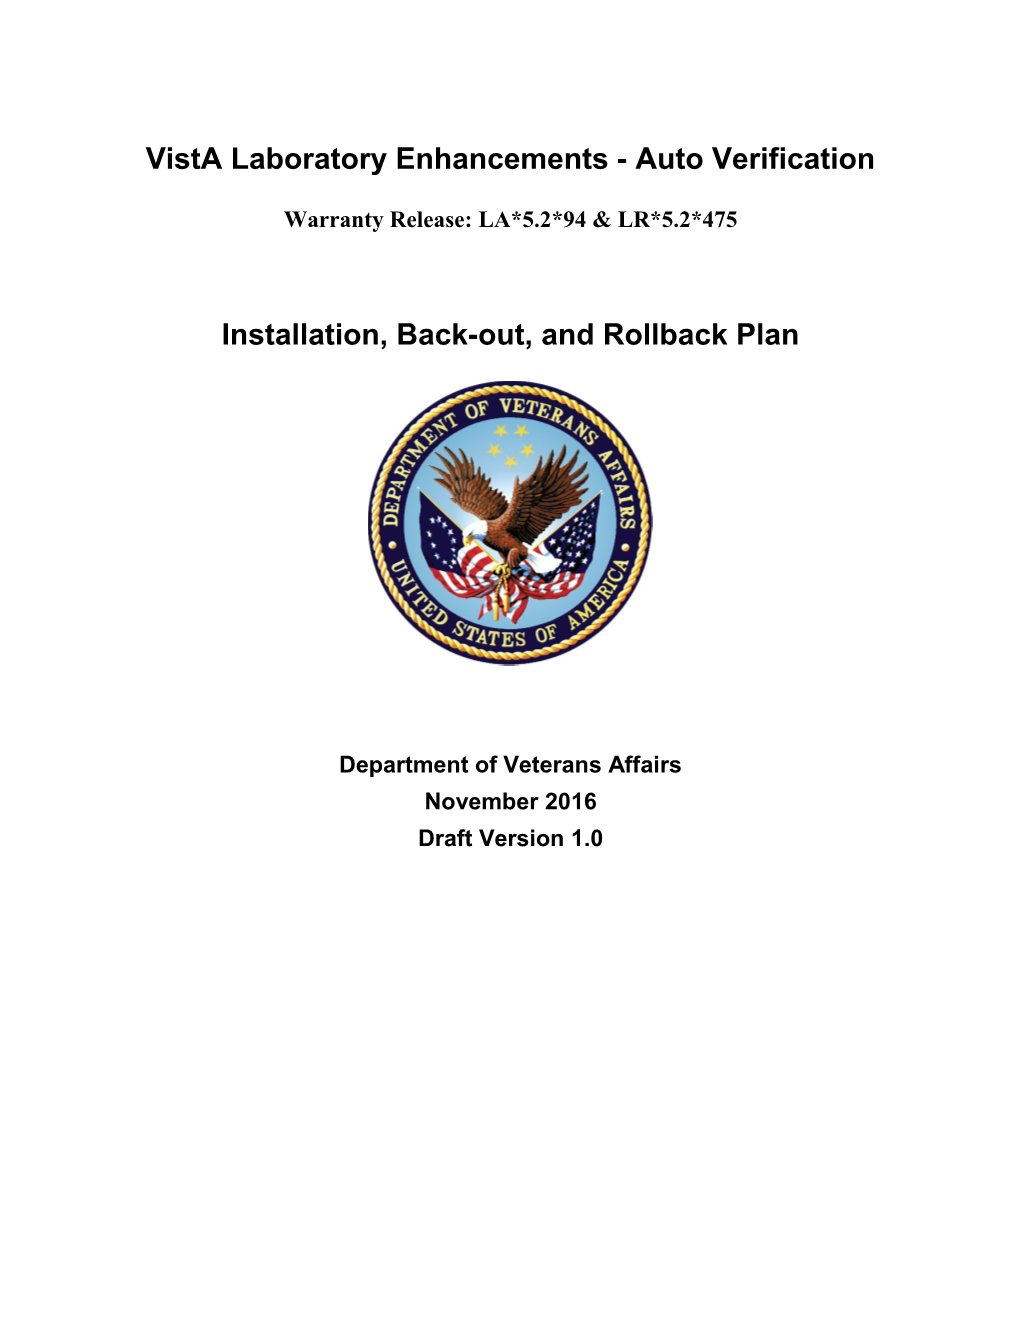 Installation Back-Out and Rollback Plan Template